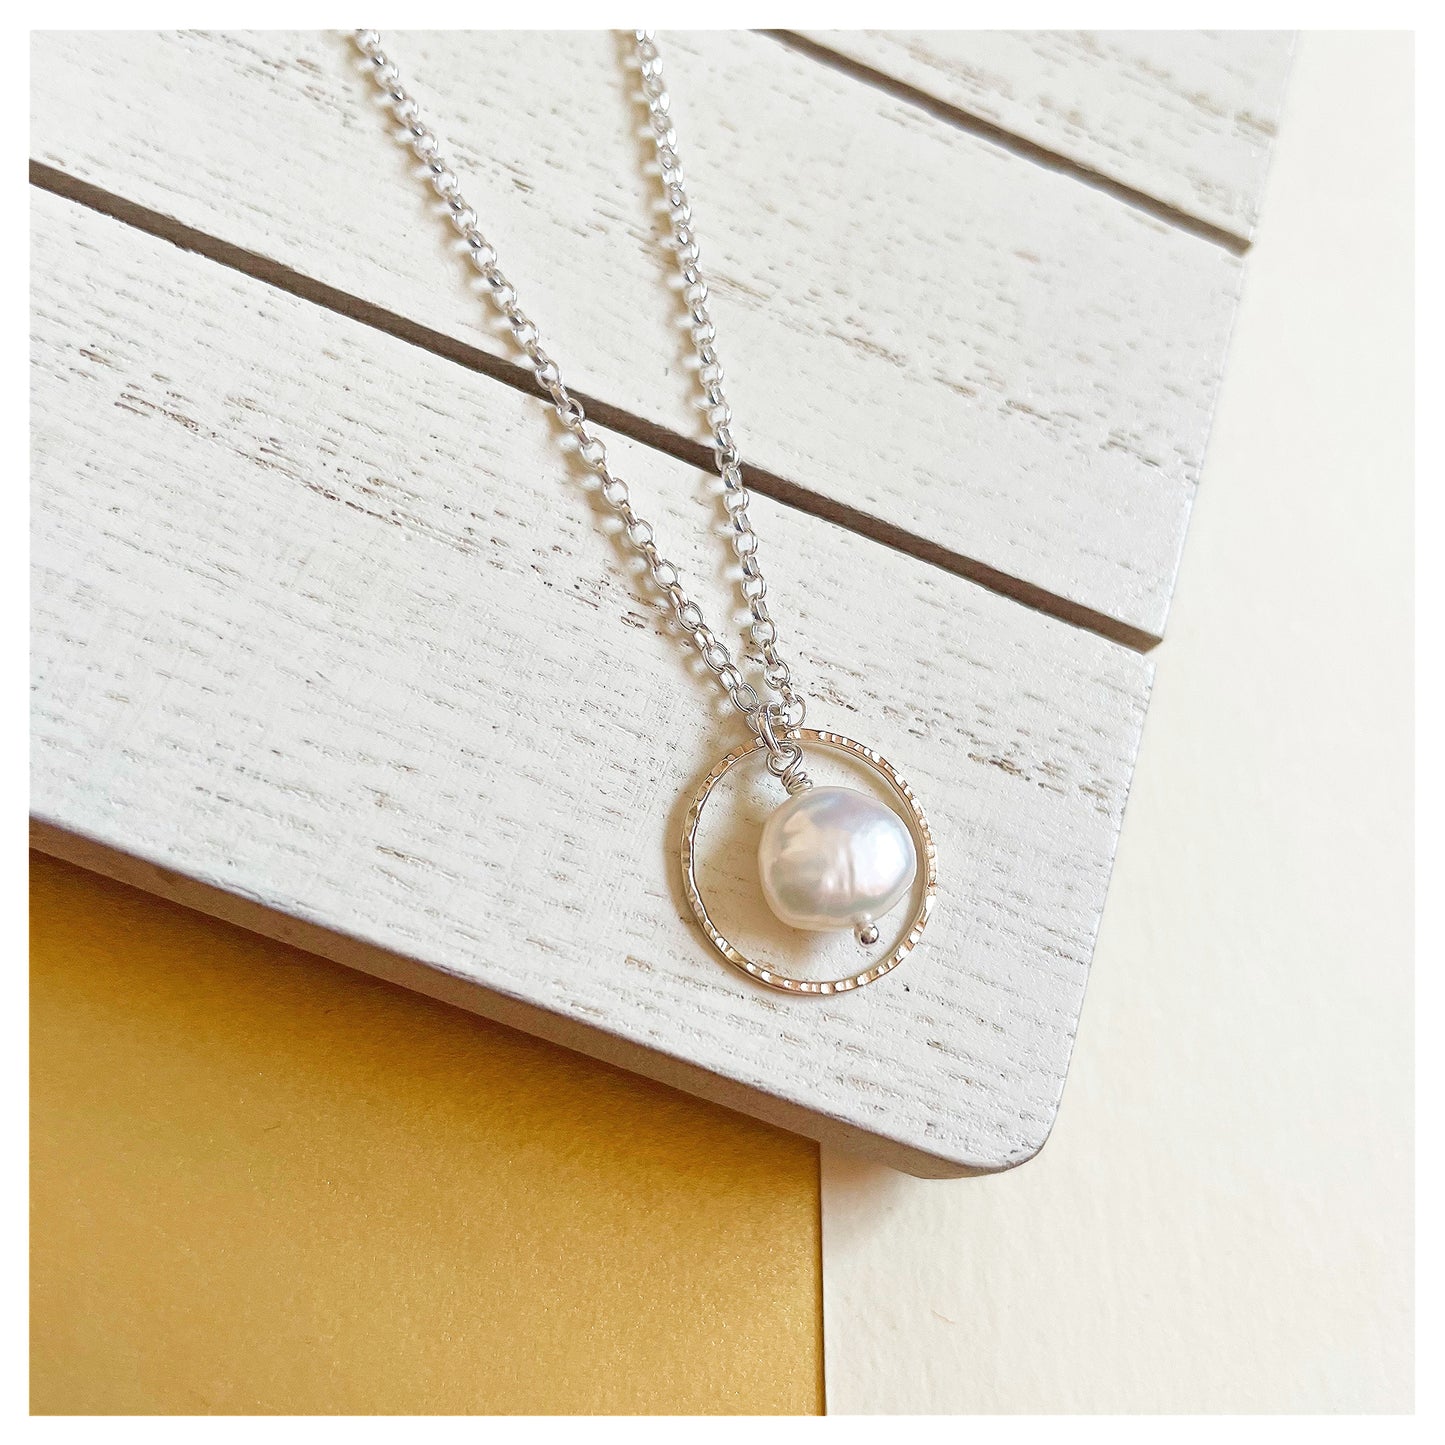 Mini 9ct Yellow Gold Hammered Circle, Sterling Silver and Fresh Water Pearl Necklace.